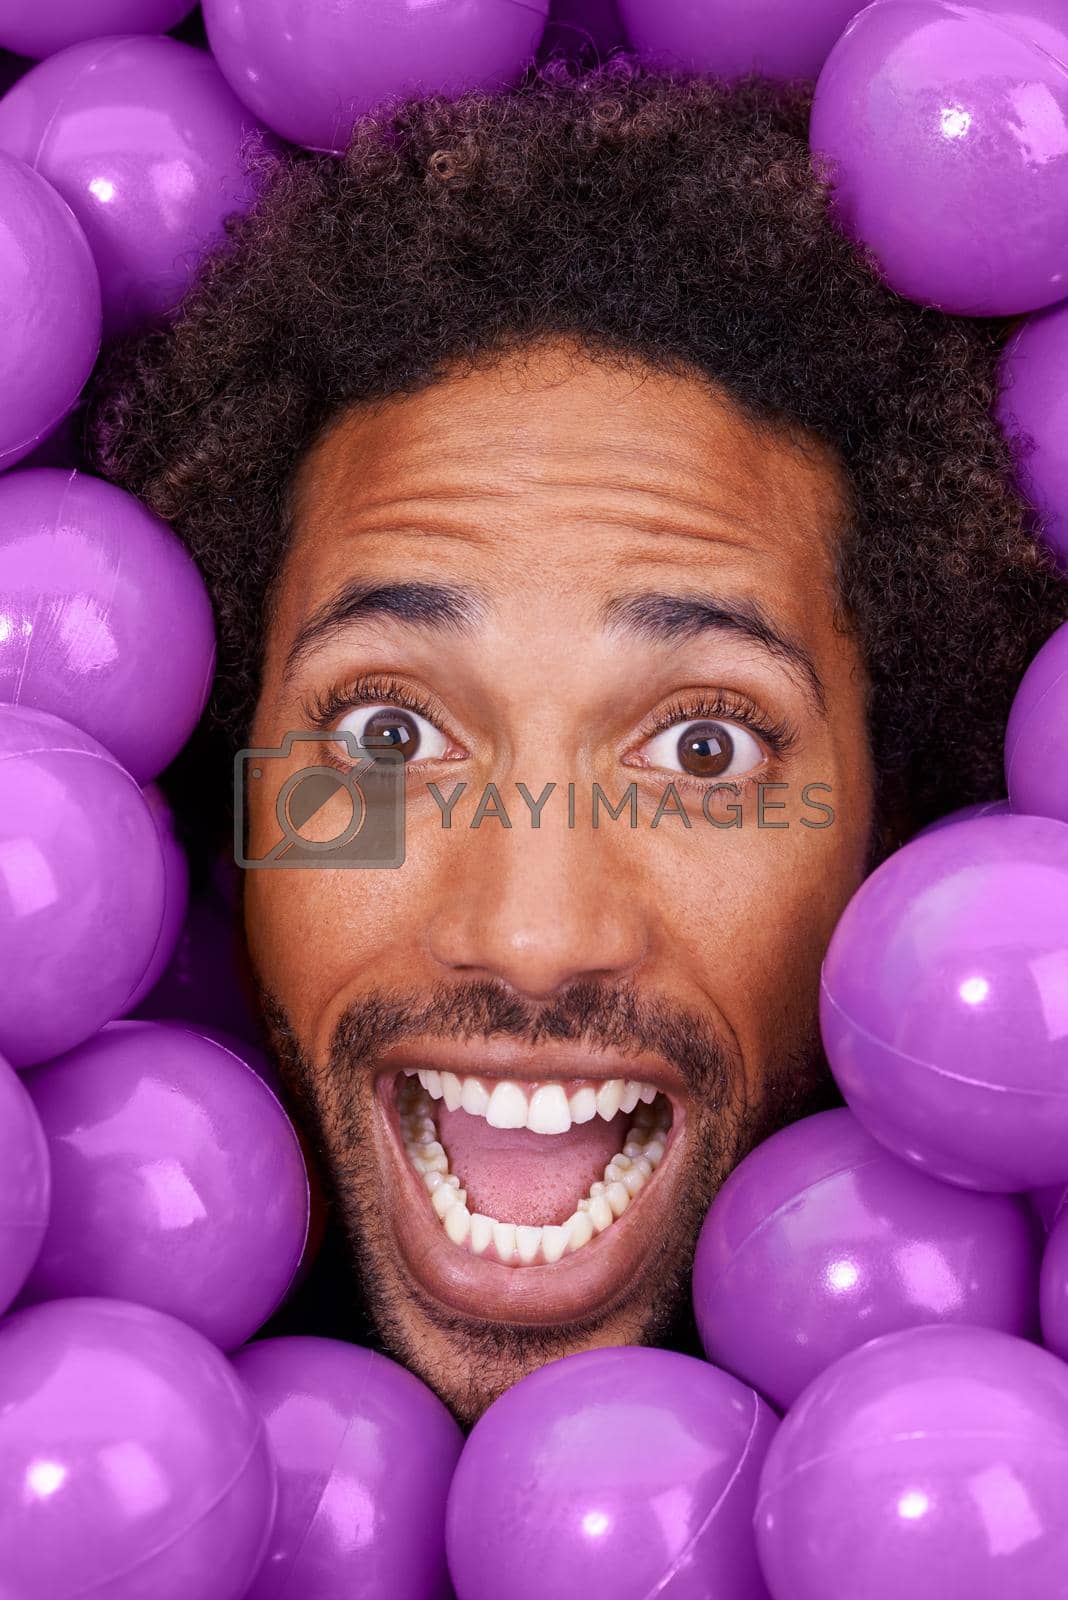 Royalty free image of Hey, this ball pit is crazy. A young black mans face amongst purple pit balls. by YuriArcurs